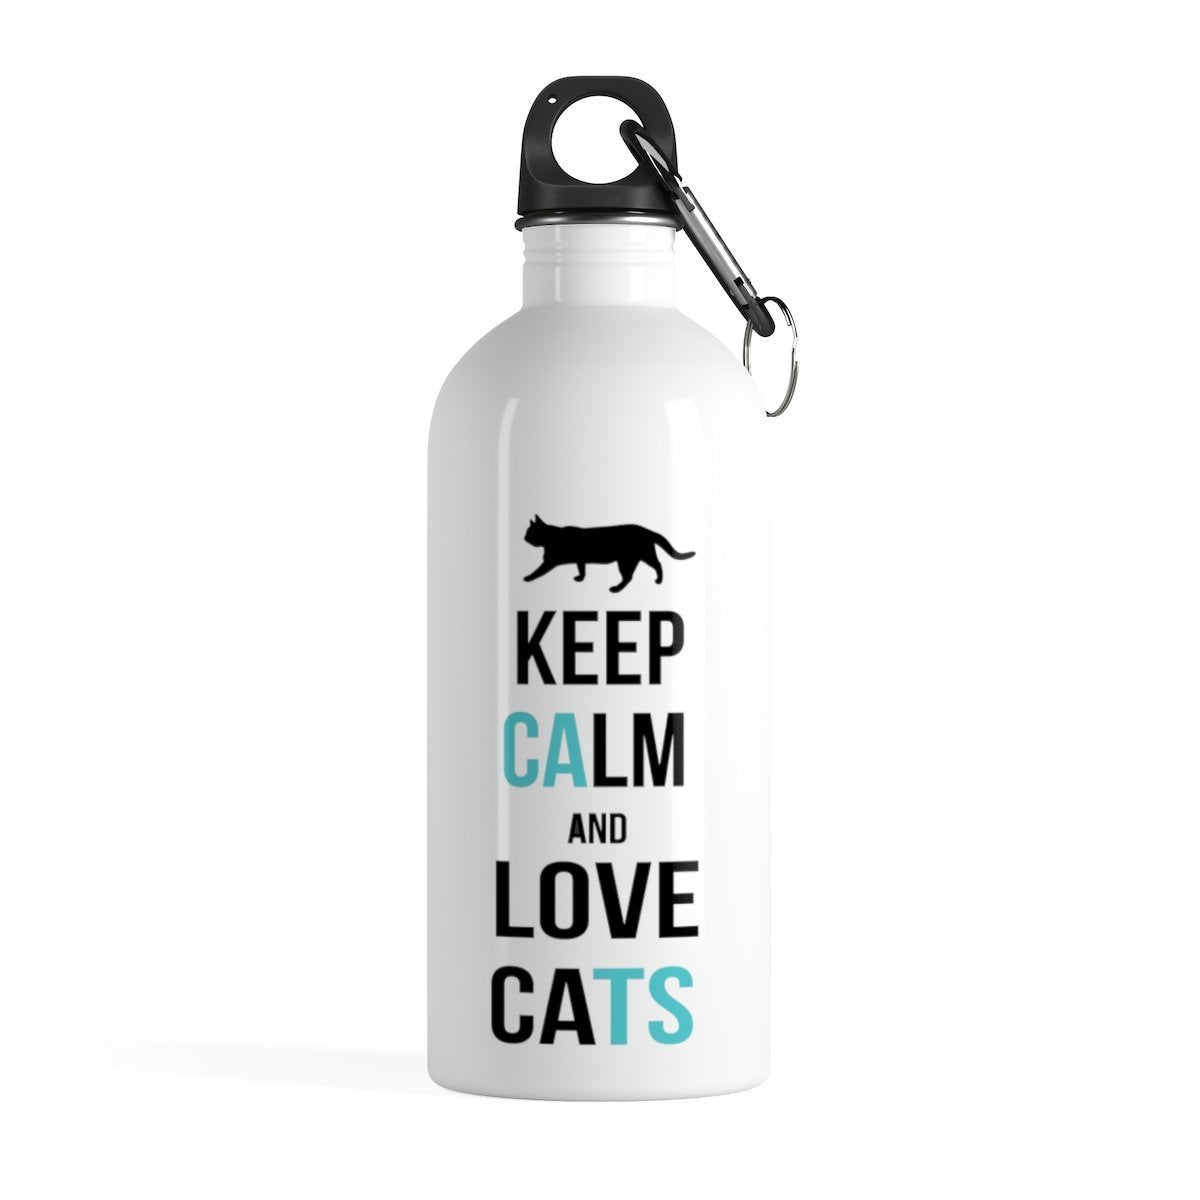 If you're looking for unique cat themed gifts, pick up this Keep Calm and Love Cats water bottle, featuring a unique black and blue print and a cat on a white background.